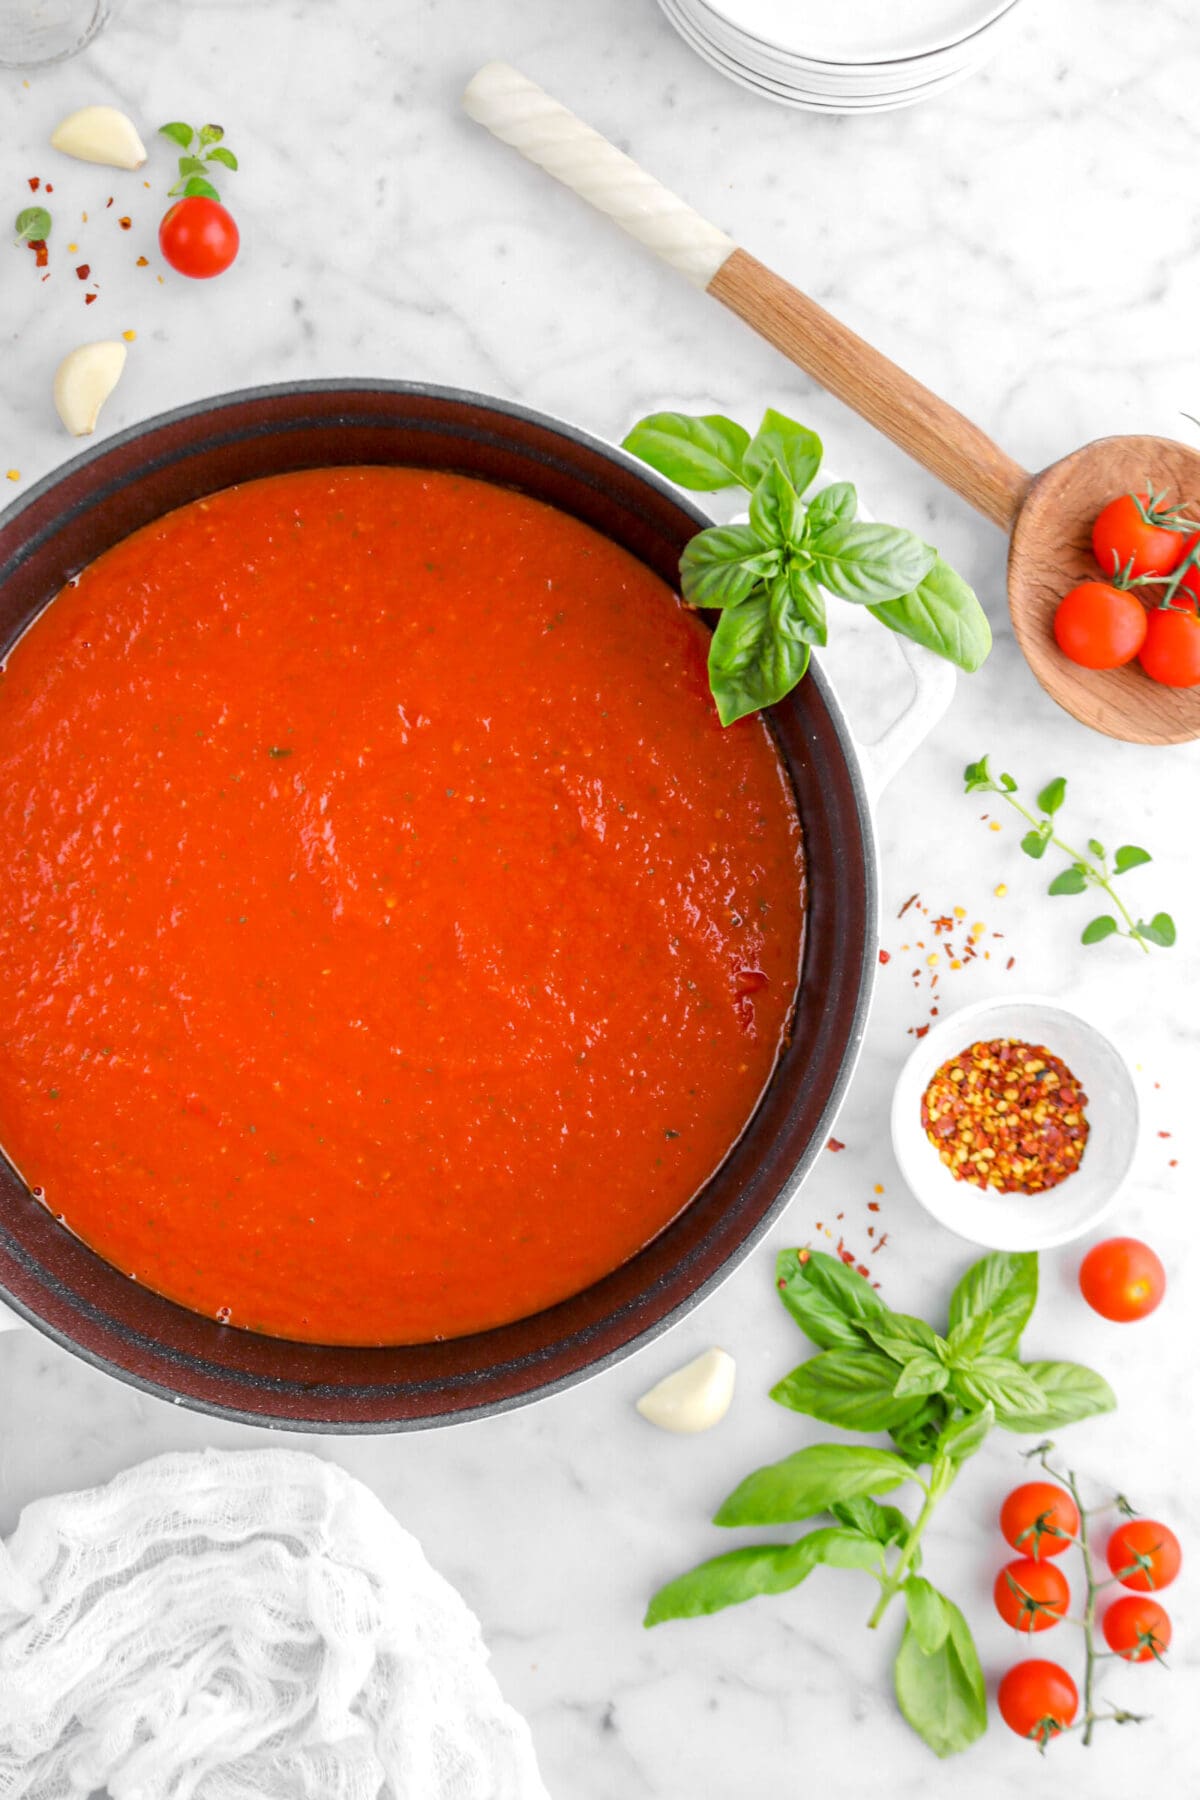 cropped overhead shot of tomato sauce in cast iron pot with basil sprig on handle, wooden spoon beside, herbs, fresh tomatoes, and garlic cloves around on marble surface